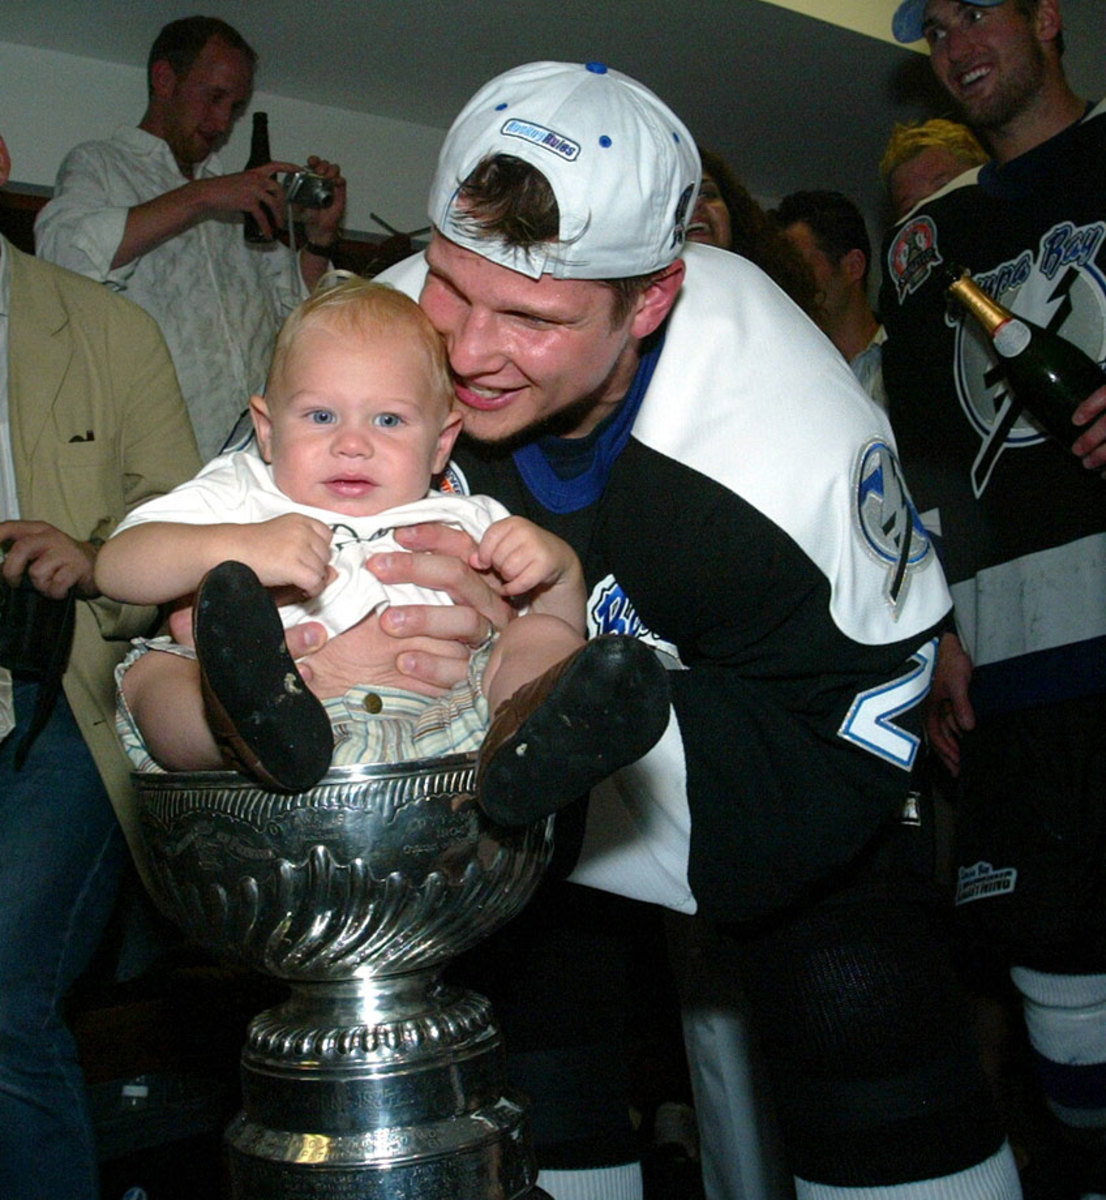 Imagine having baby pictures in the Stanley Cup🥺🏆 #hockey #stanleycu